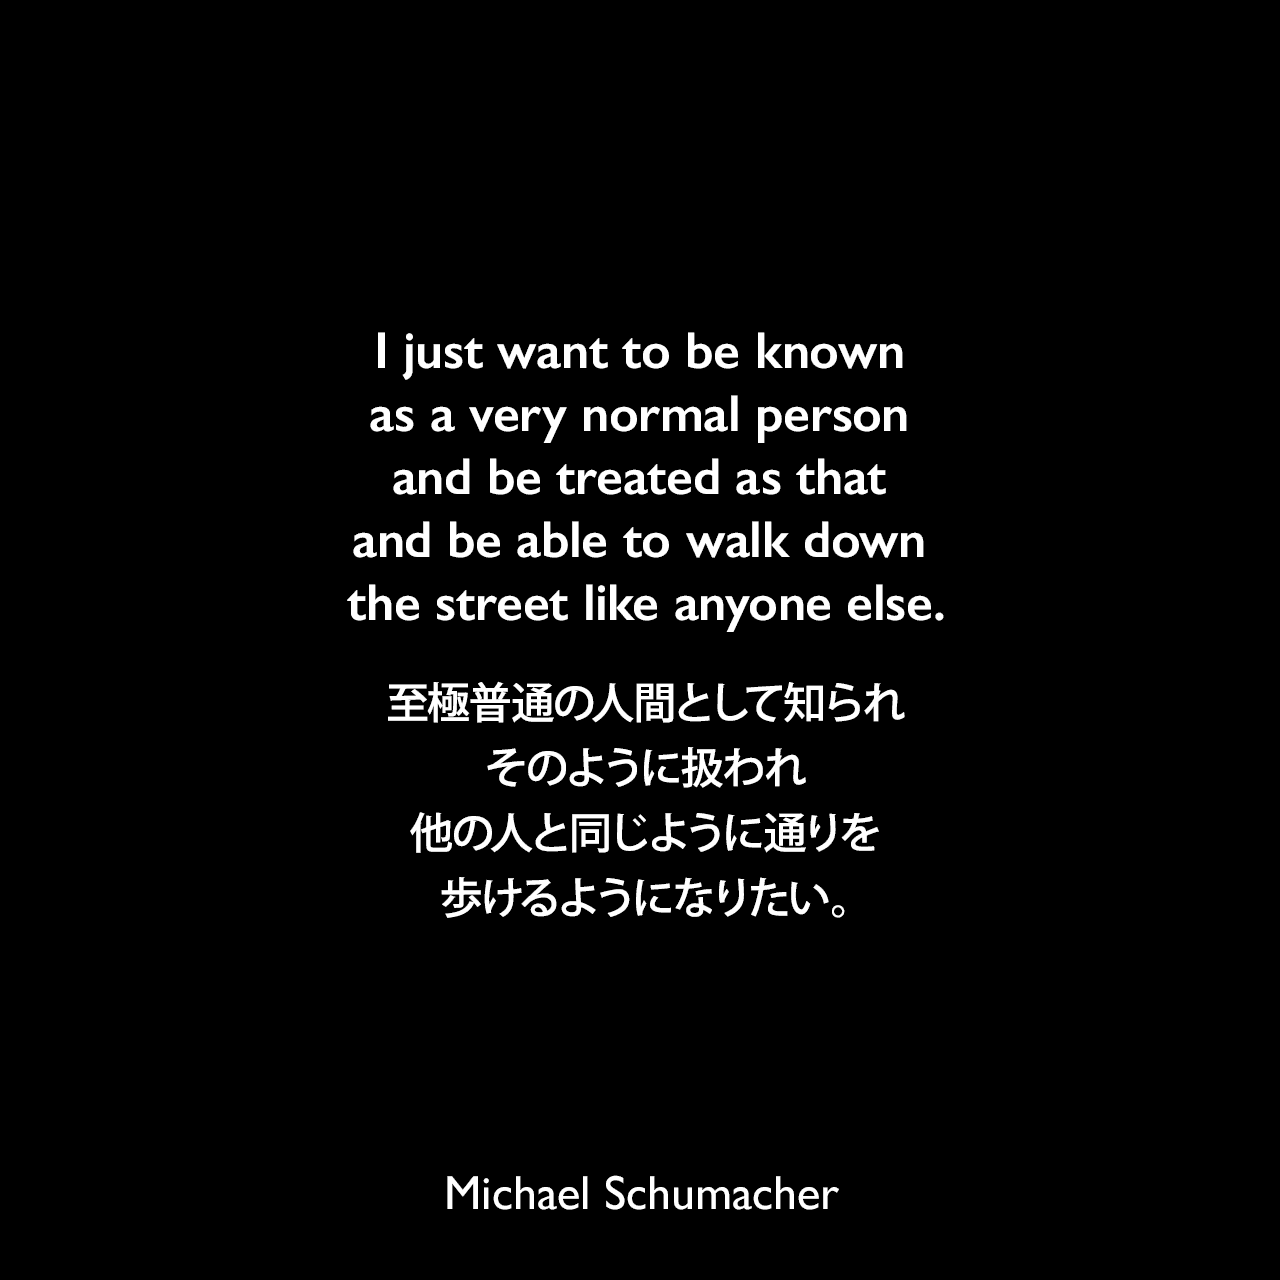 I just want to be known as a very normal person and be treated as that and be able to walk down the street like anyone else.至極普通の人間として知られ、そのように扱われ、他の人と同じように通りを歩けるようになりたい。Michael Schumacher